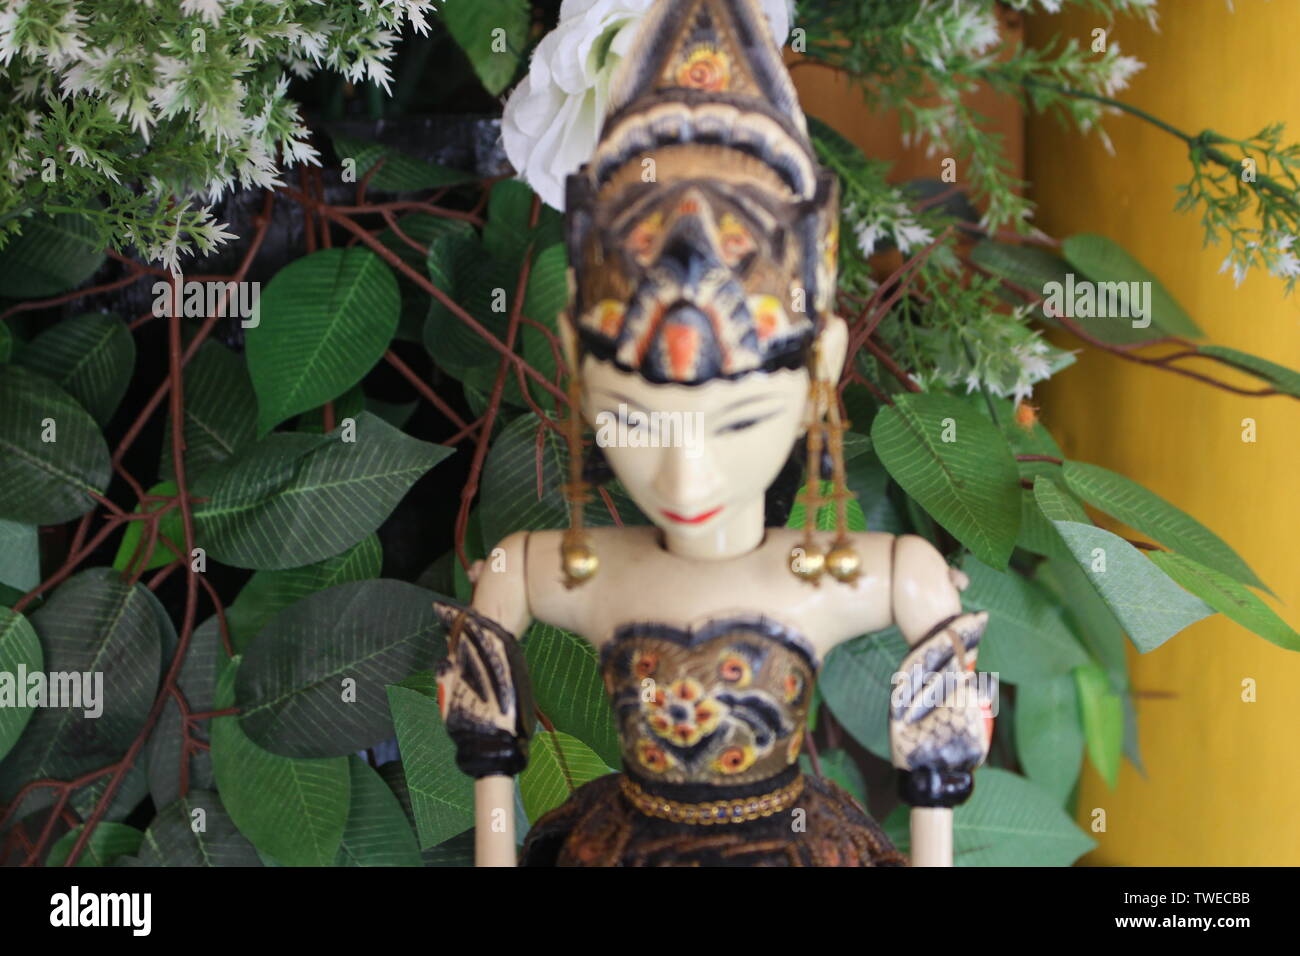 puppet - the culture of the Sundanese tribe of Indonesia Stock Photo